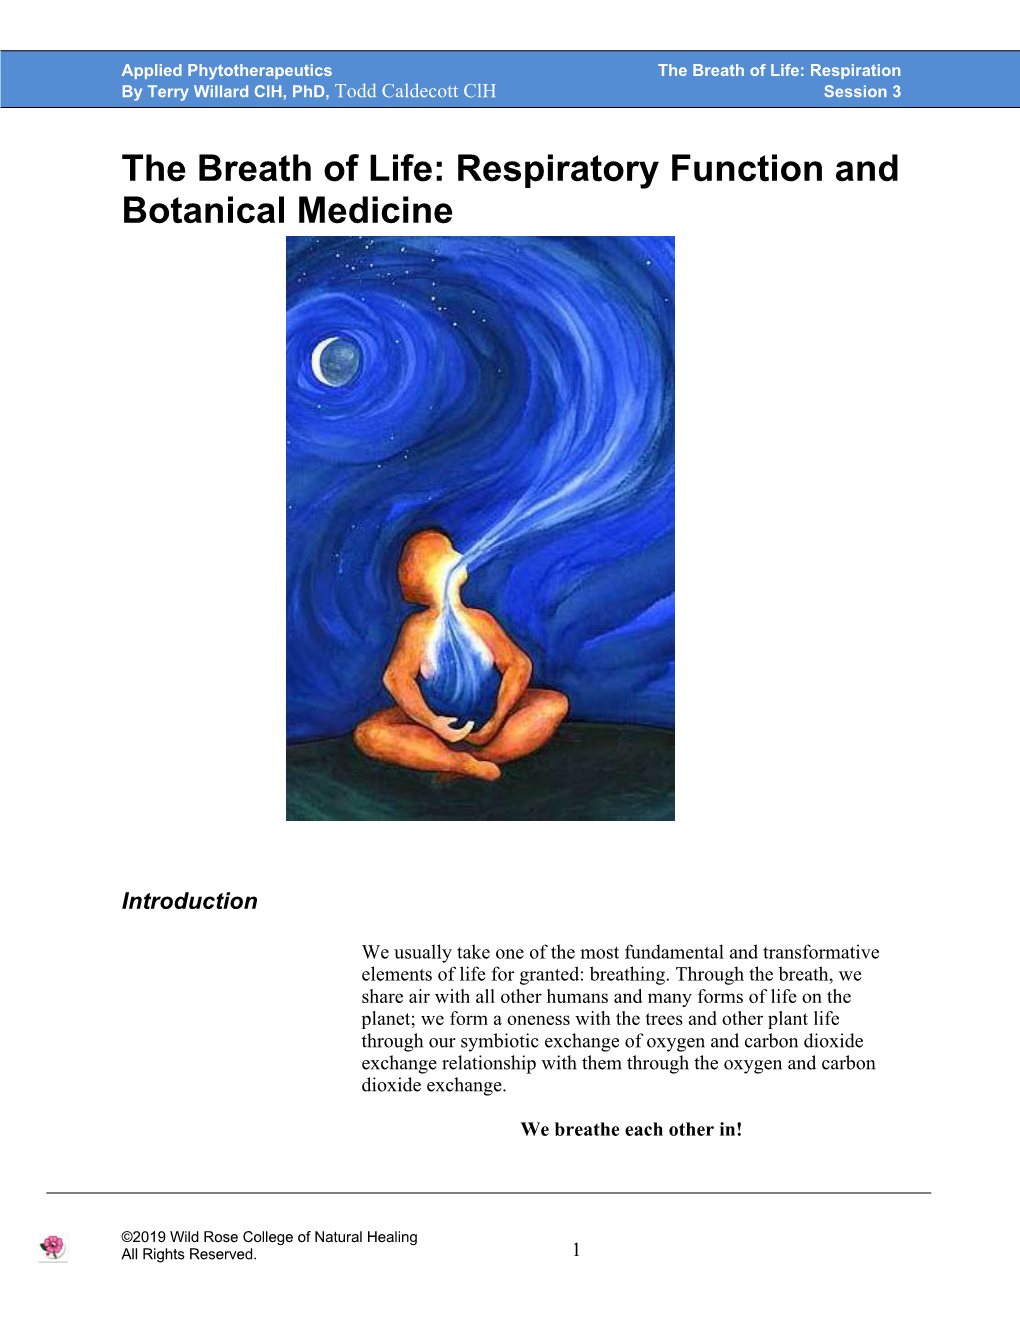 The Breath of Life: Respiratory Function and Botanical Medicine